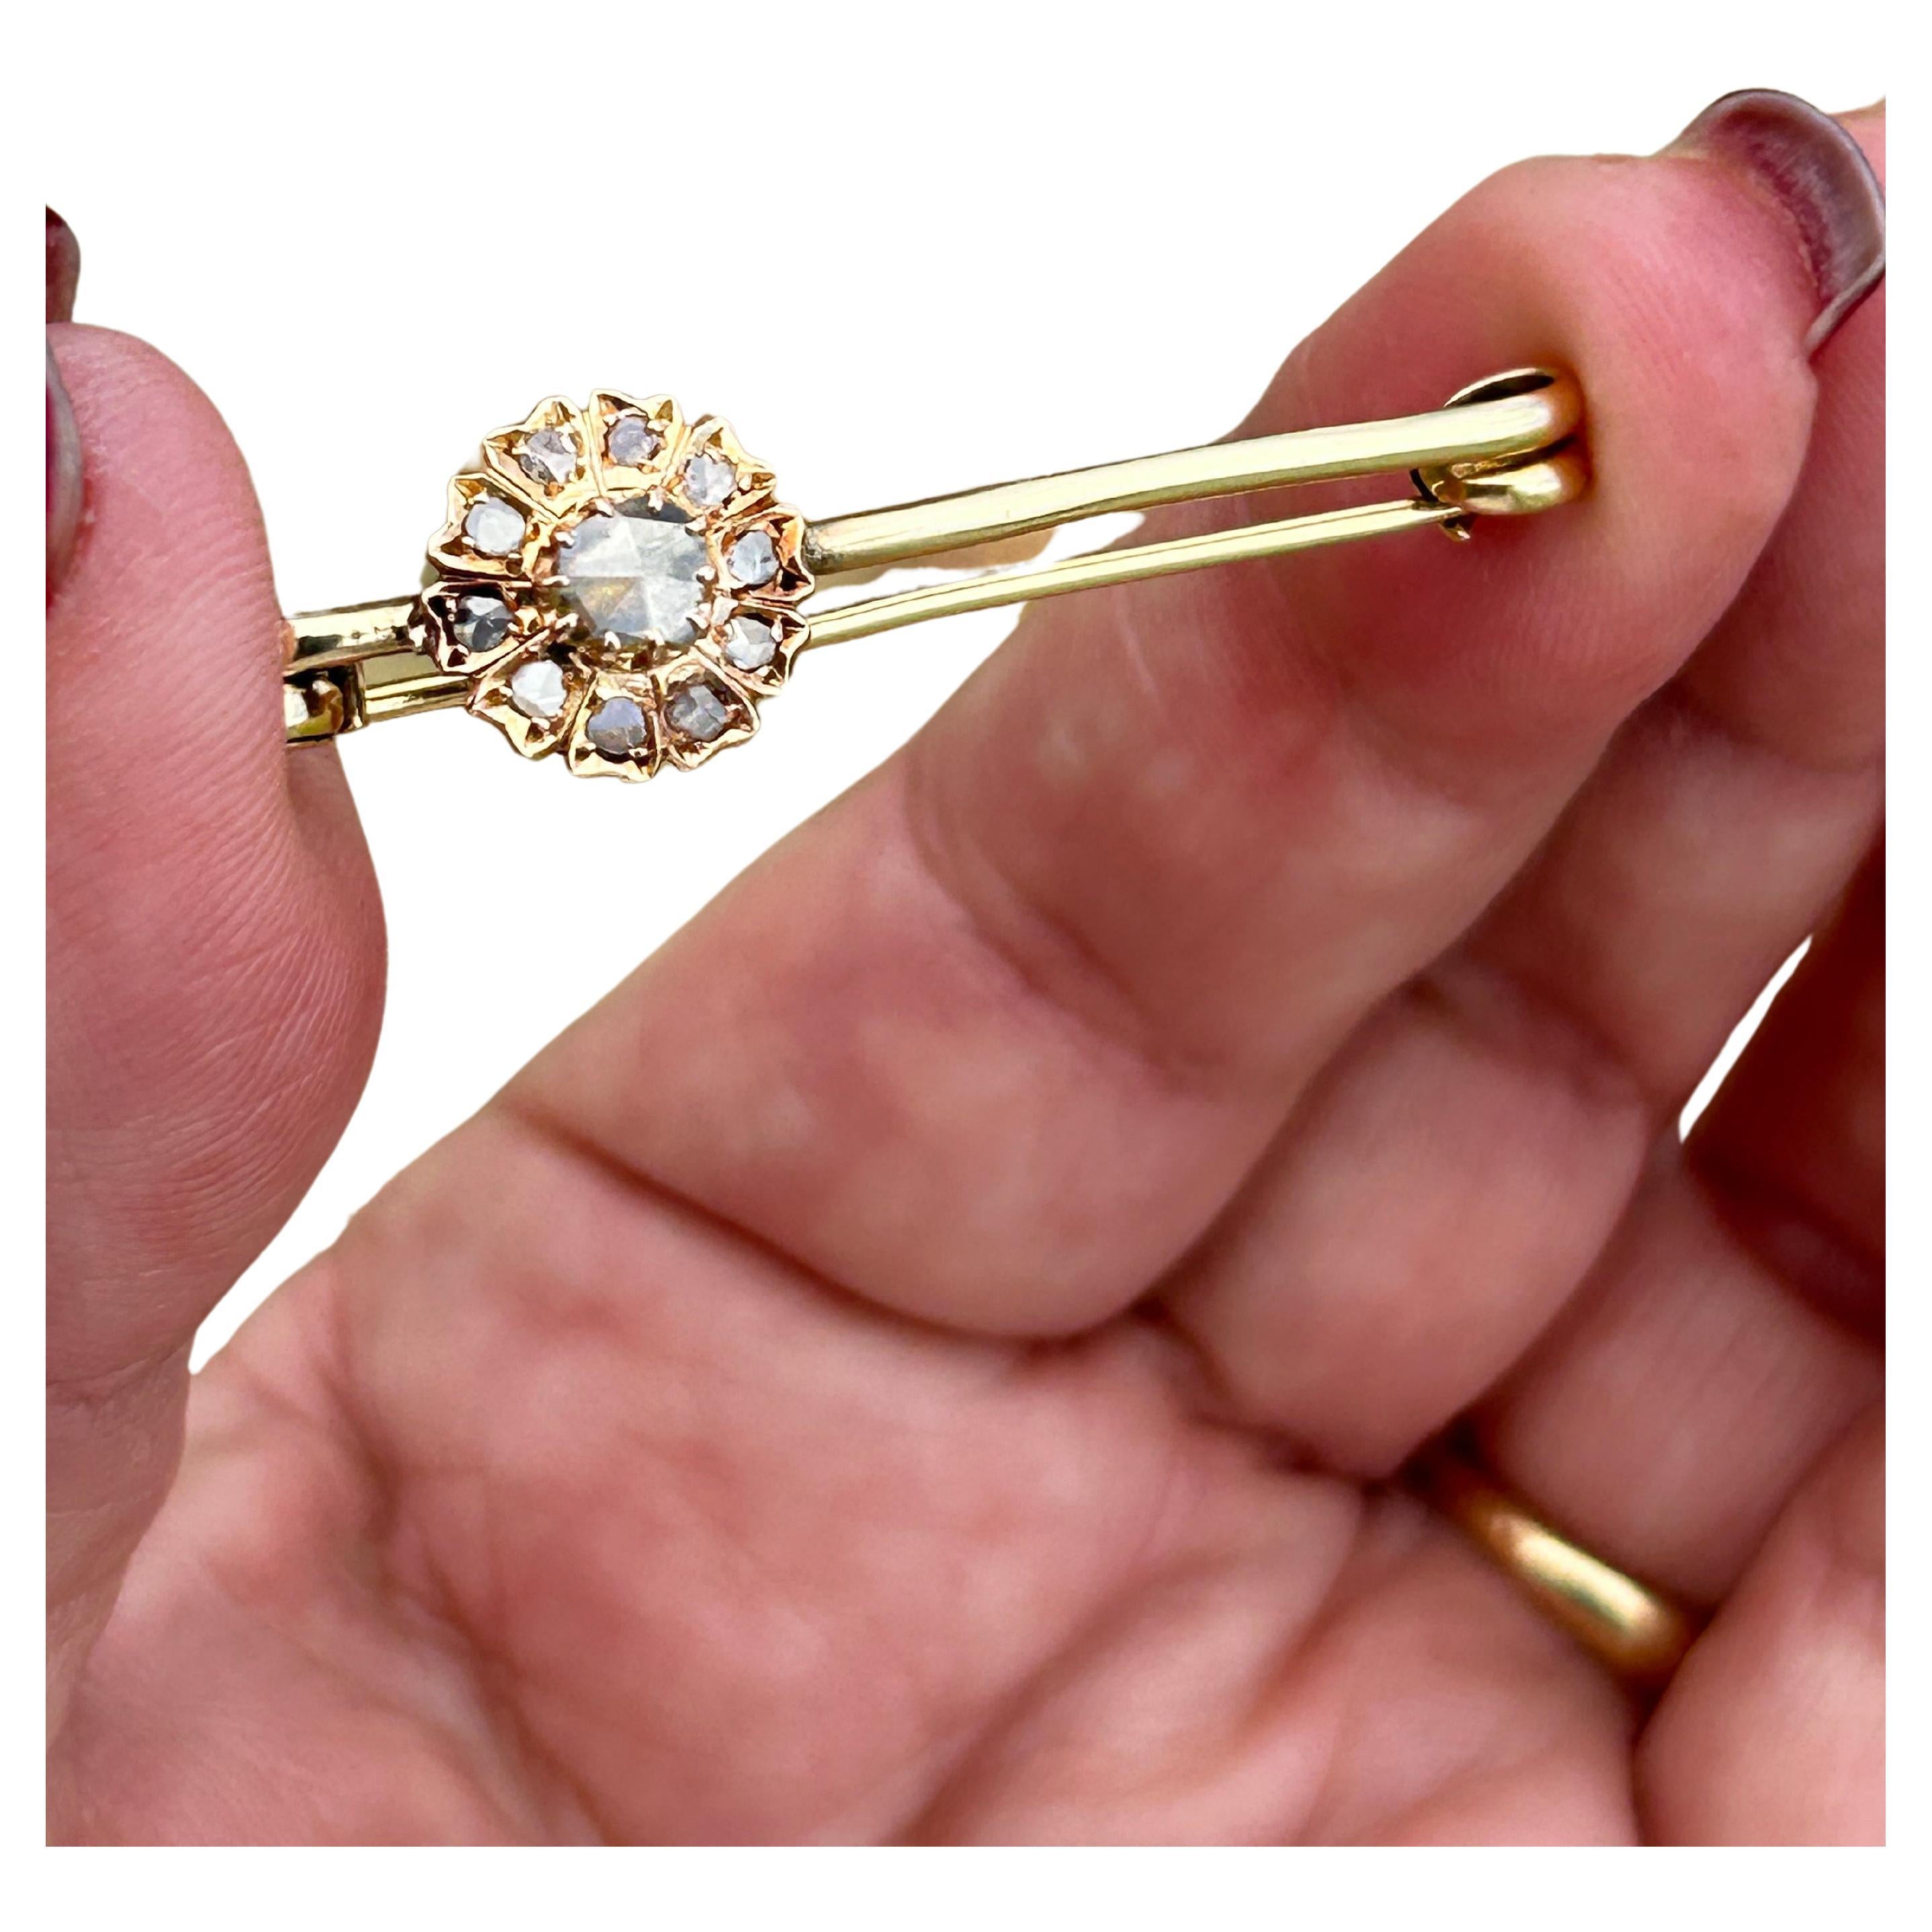 Antique Victorian Rose Cut Diamond Flower Brooch 18K Yellow Gold In Excellent Condition For Sale In Joelton, TN